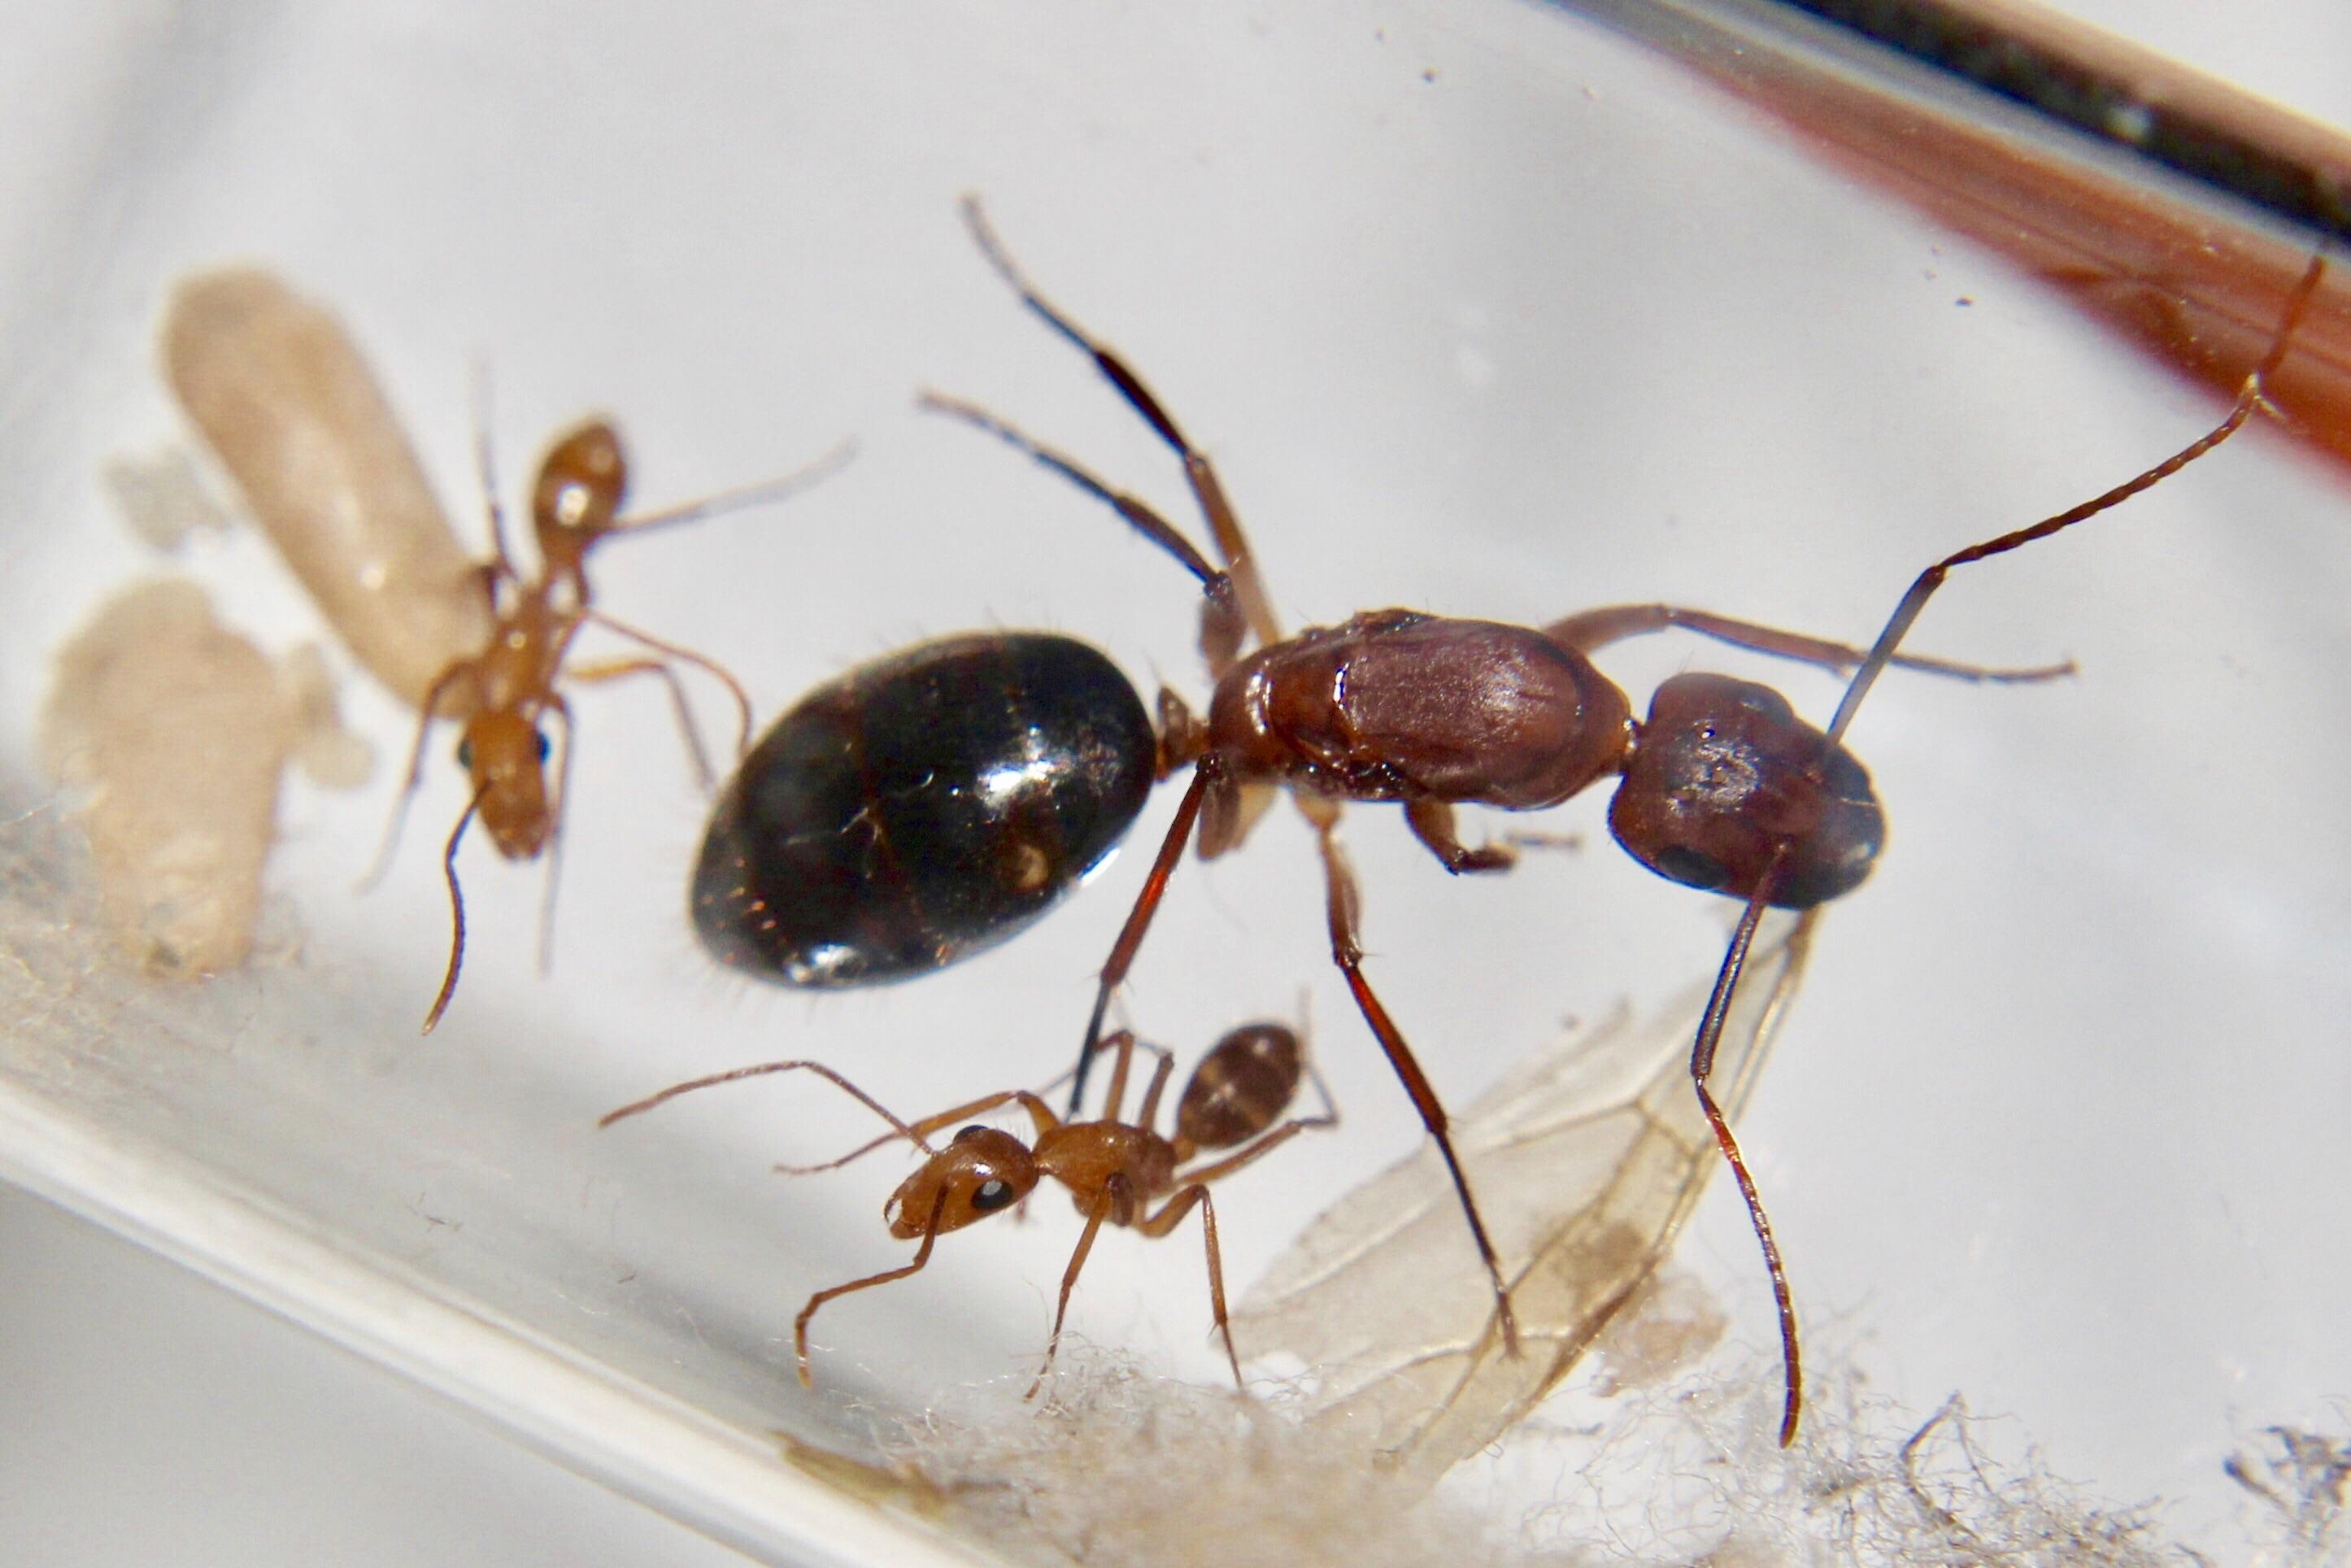 Best R Antkeeping Image On Pholder. Camponotus Tortuganus Queen With Her Beautiful Workers